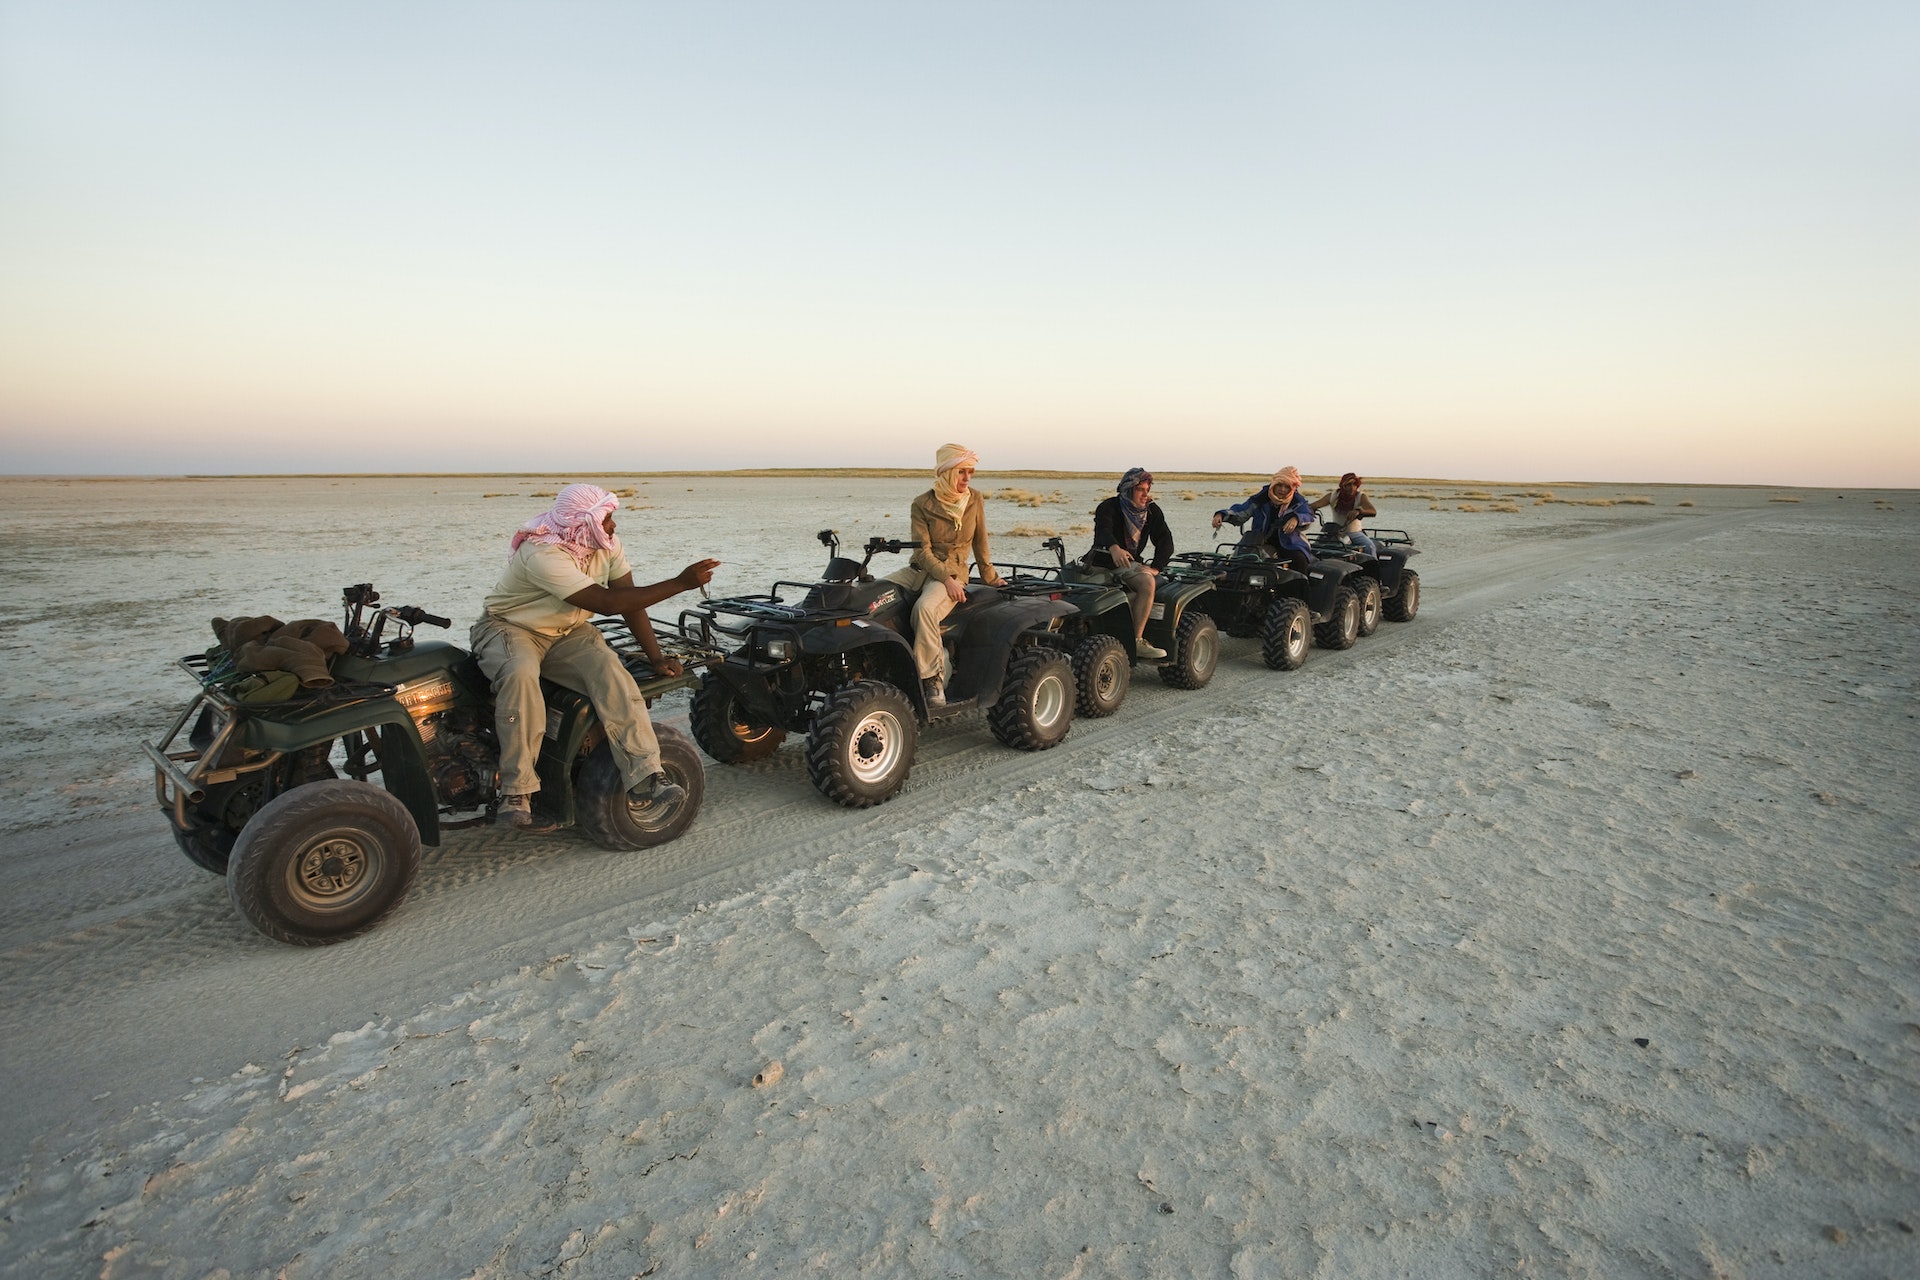 Tourists explore the salt flats of Makgadikgadi Pans on quad bikes, which are permitted on the fragile plains in single file only.